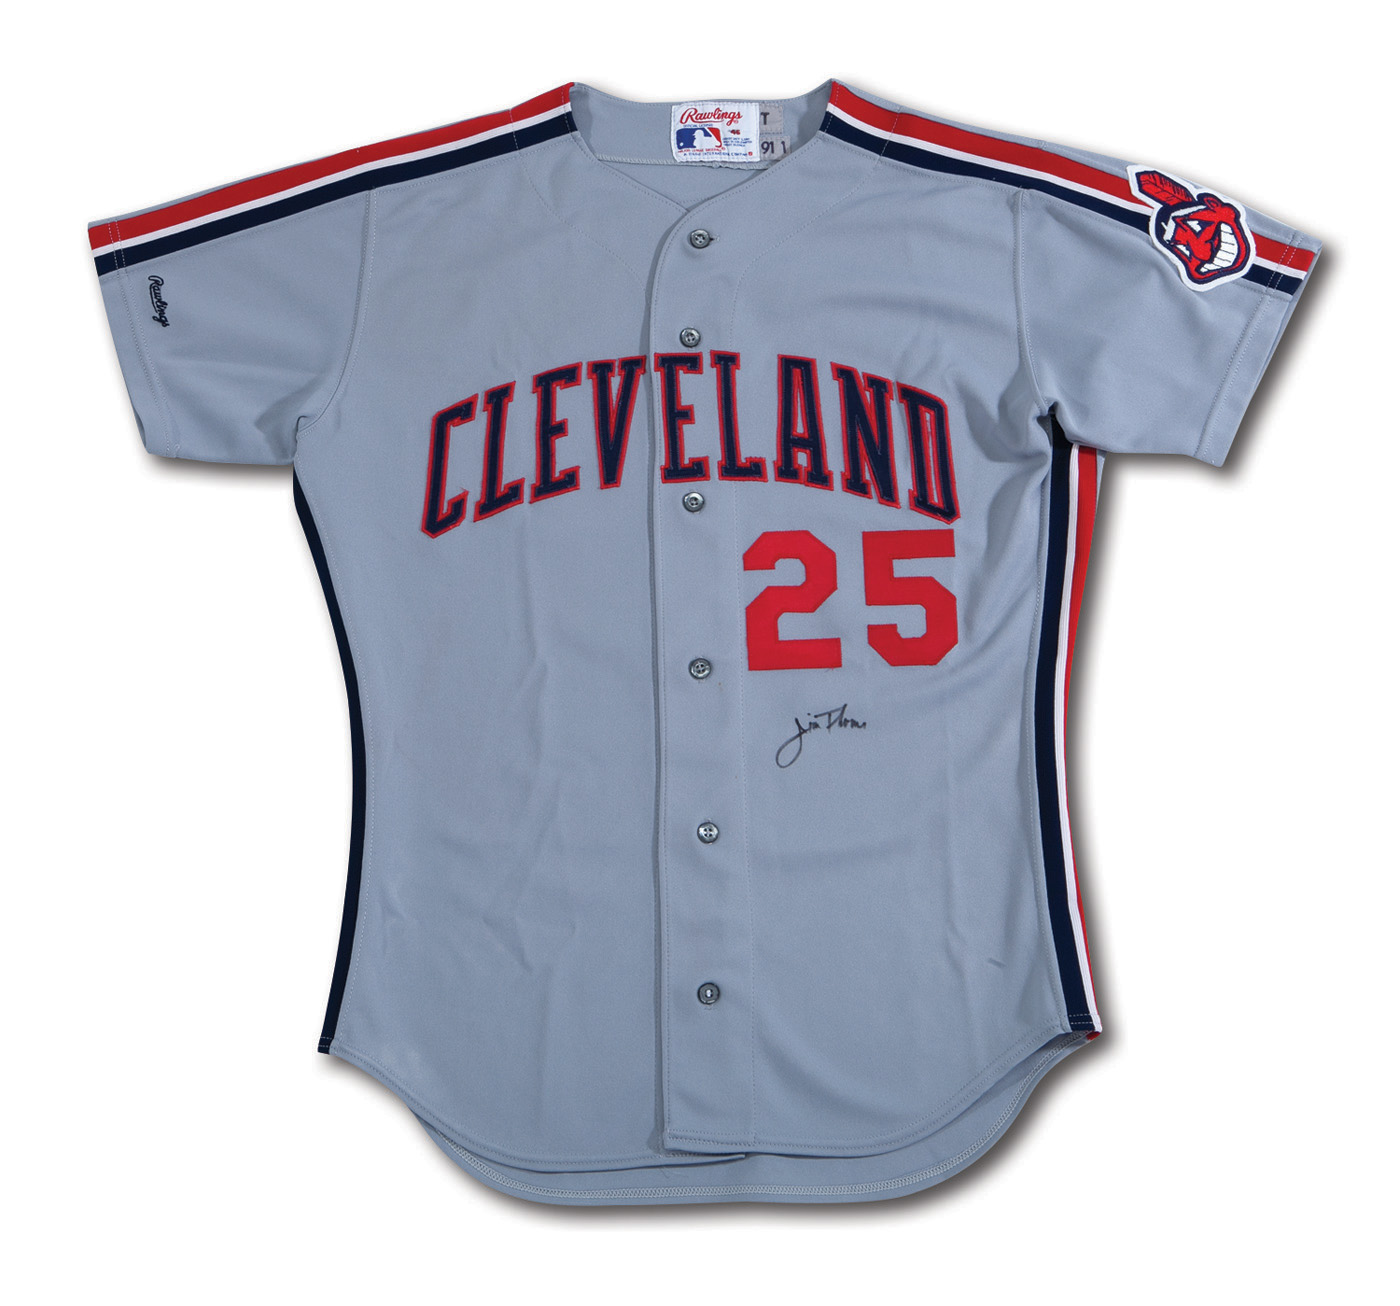 2015 cleveland indians jersey